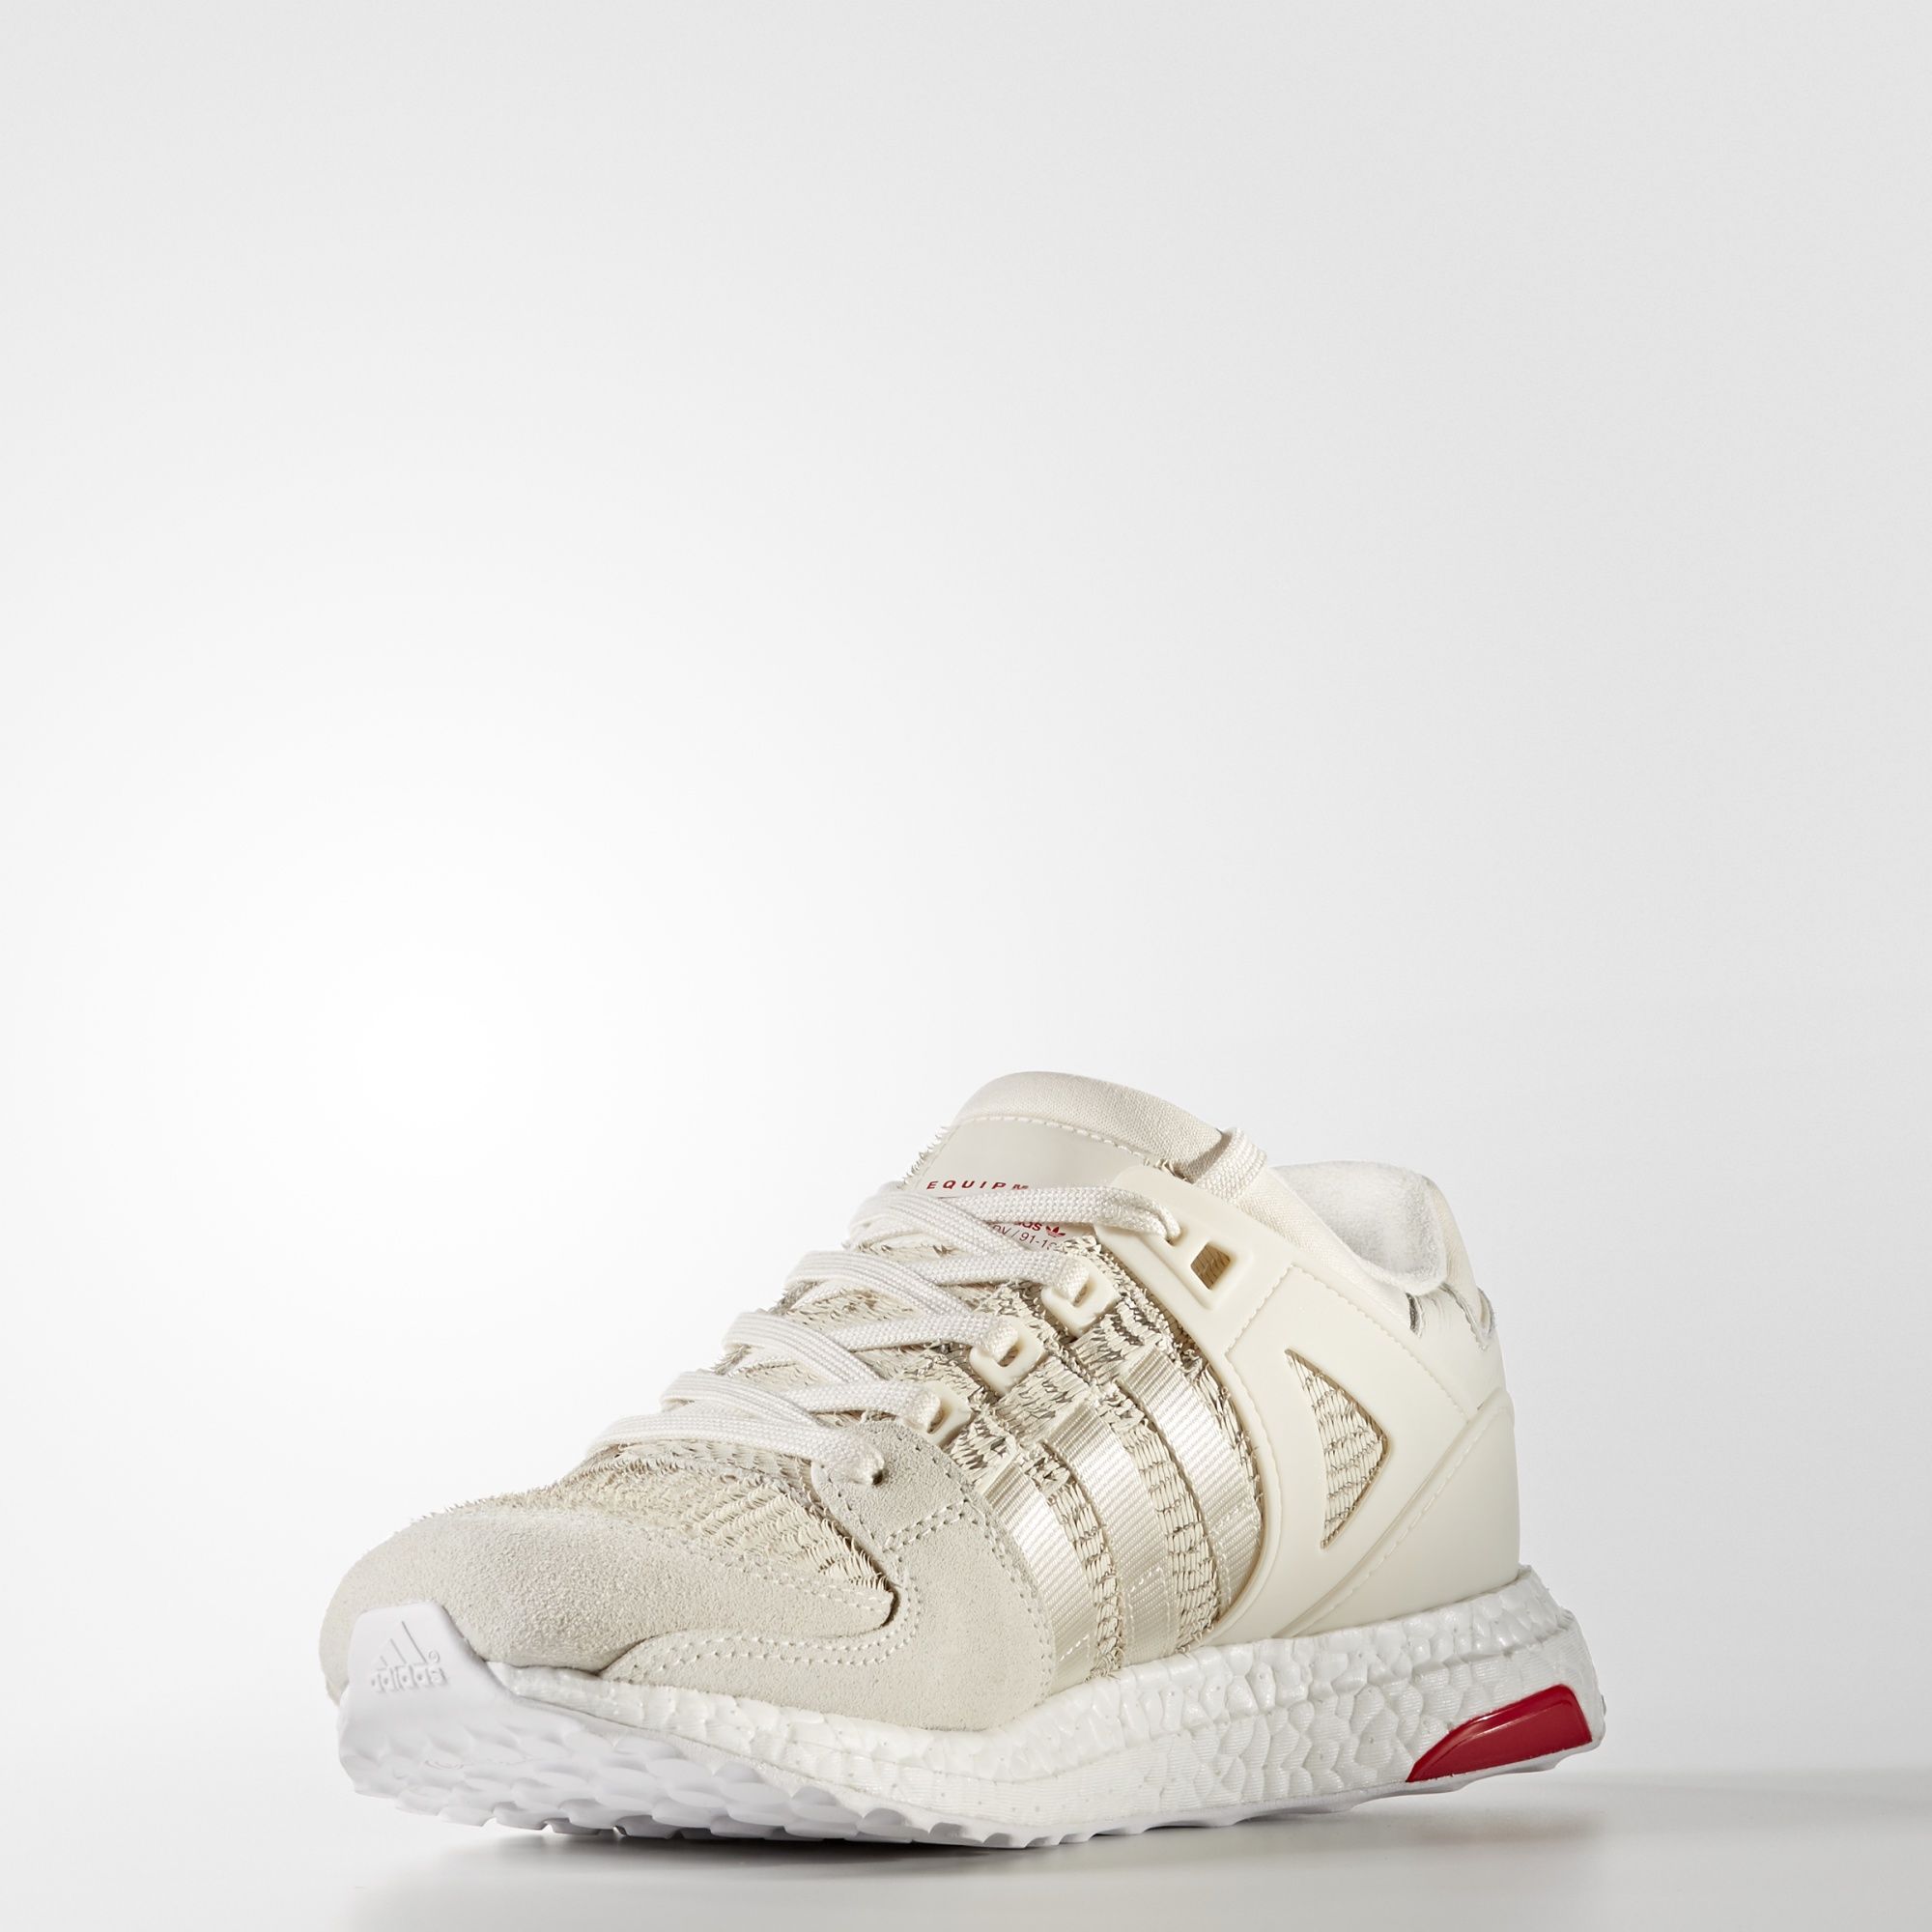 Adidas EQT Support Ultra CNY
« Chinese New Year »
Chalk White / Footwear White